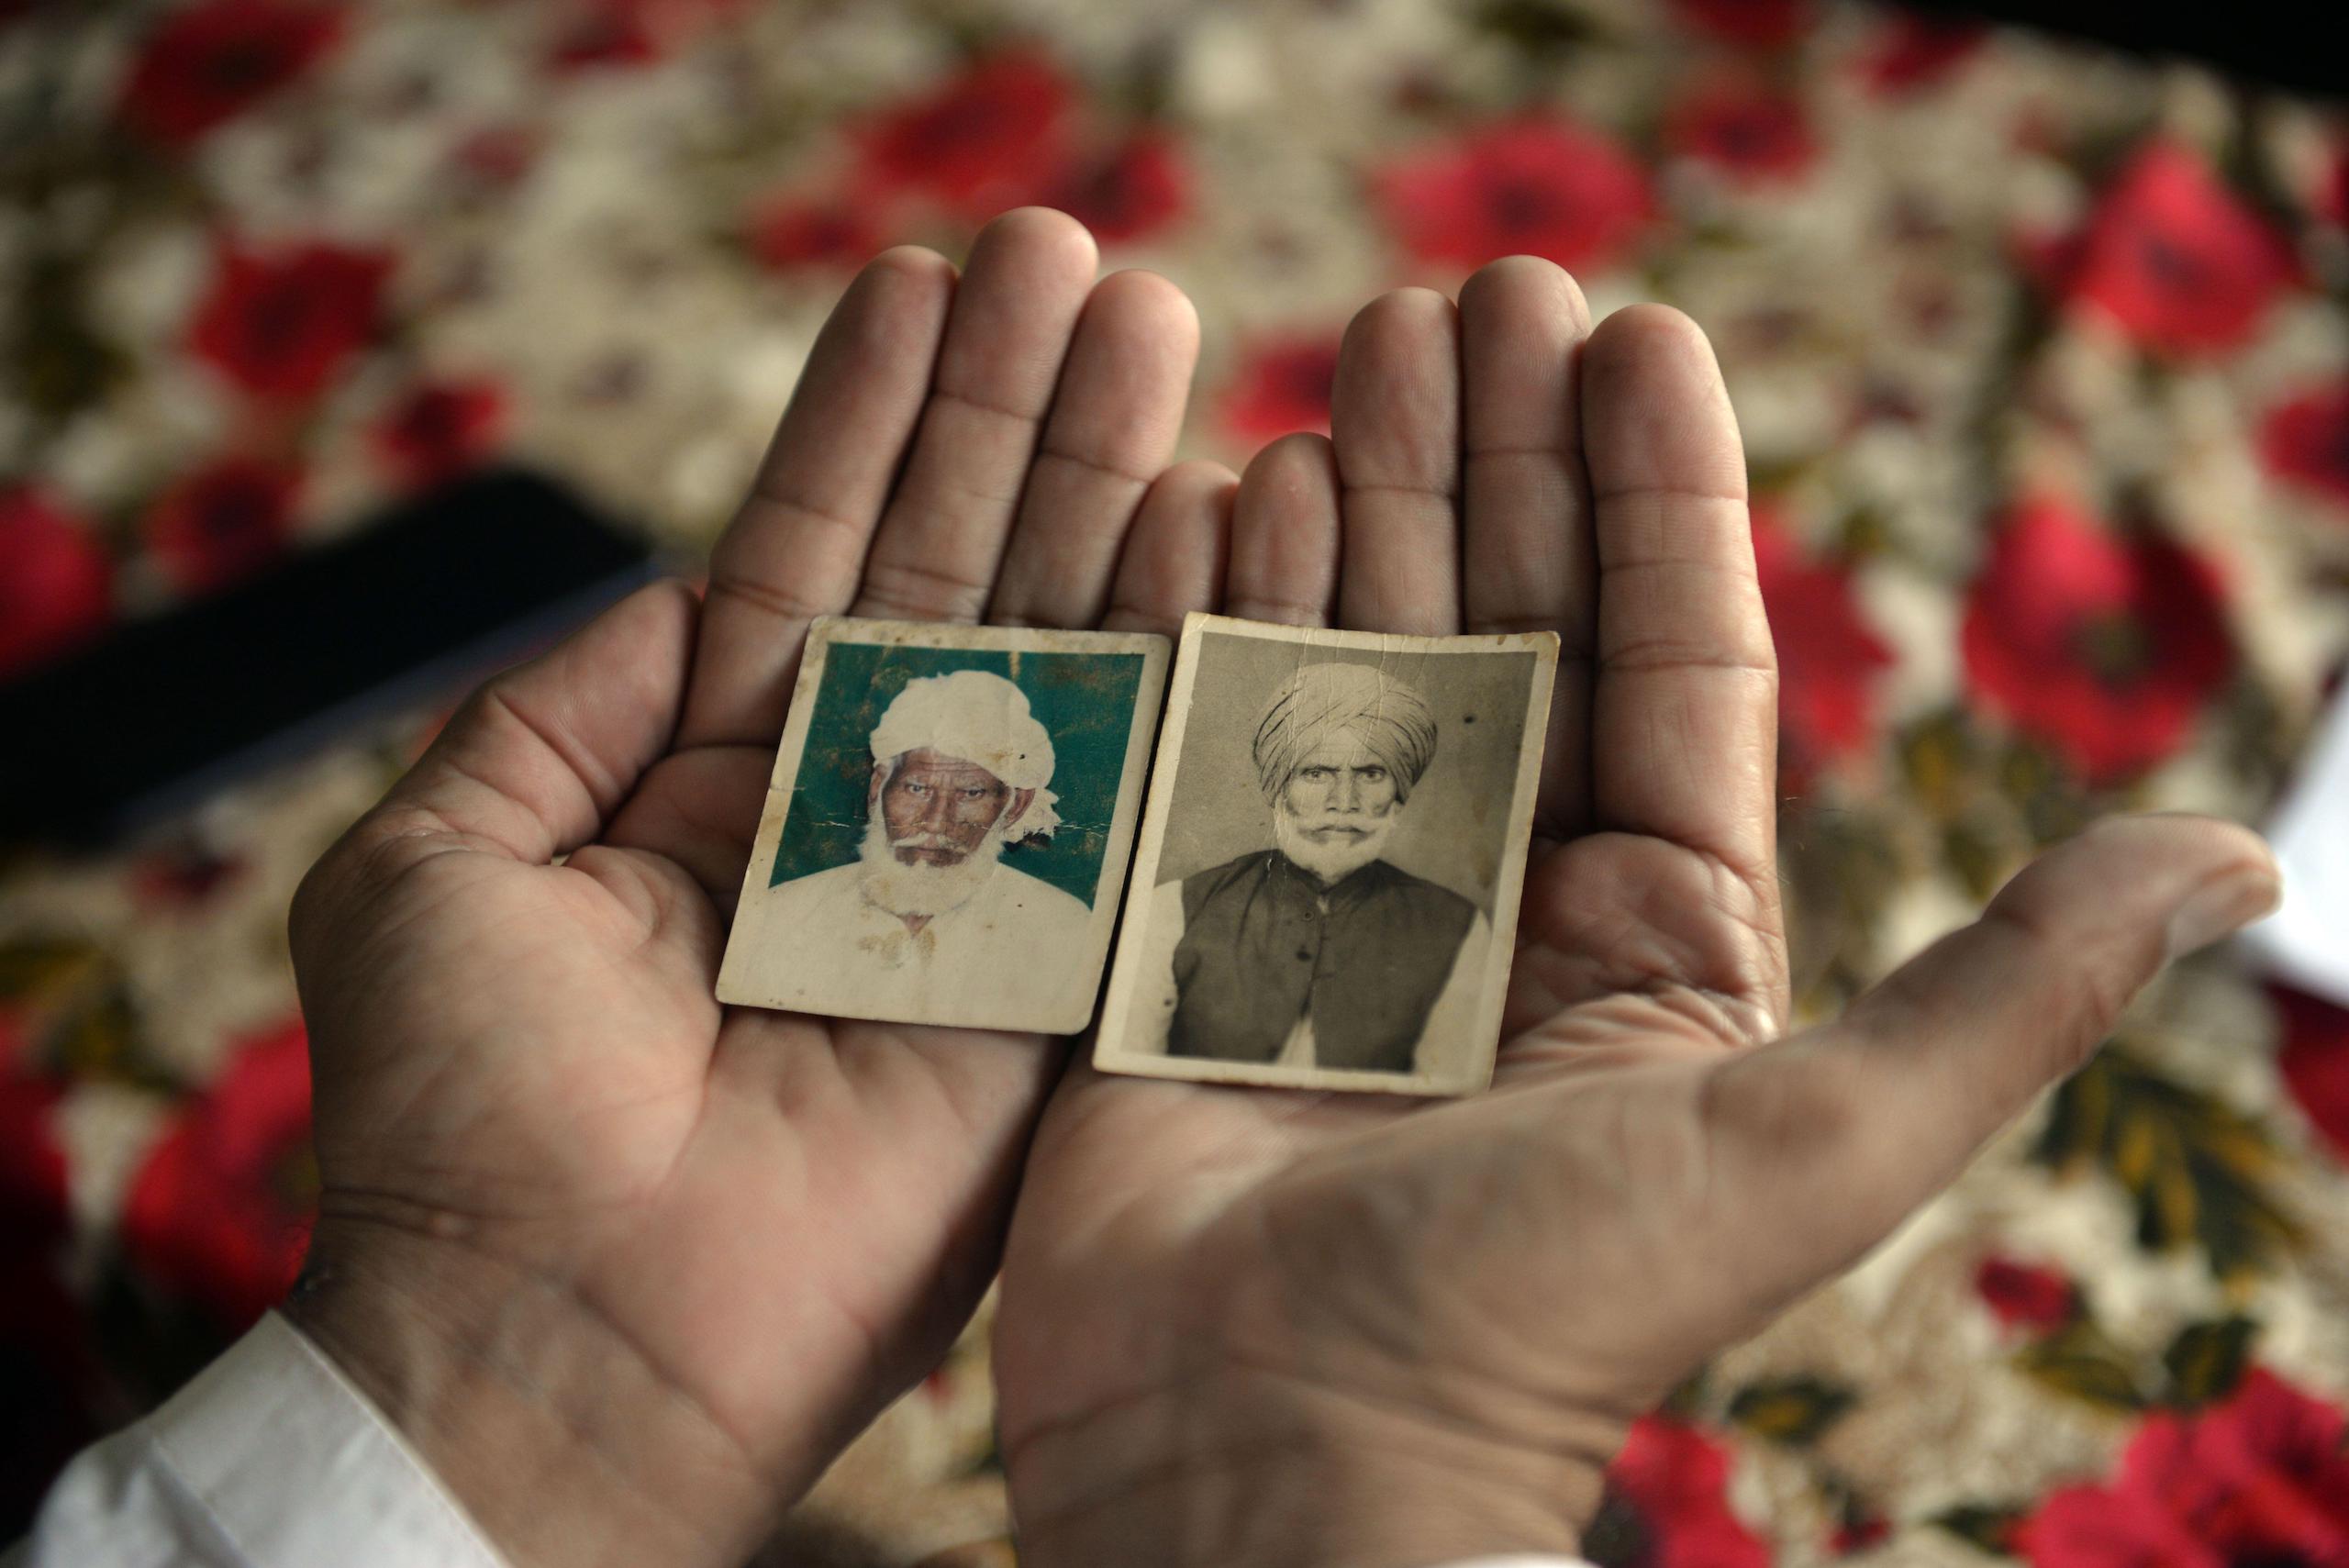 <p>Shahbaz Khan shows pictures of his uncle Inayat Khan (left) and his late father Sharif Khan (right), who were separated at the time of Partition (Image: Murtaza Ali / Alamy)</p>